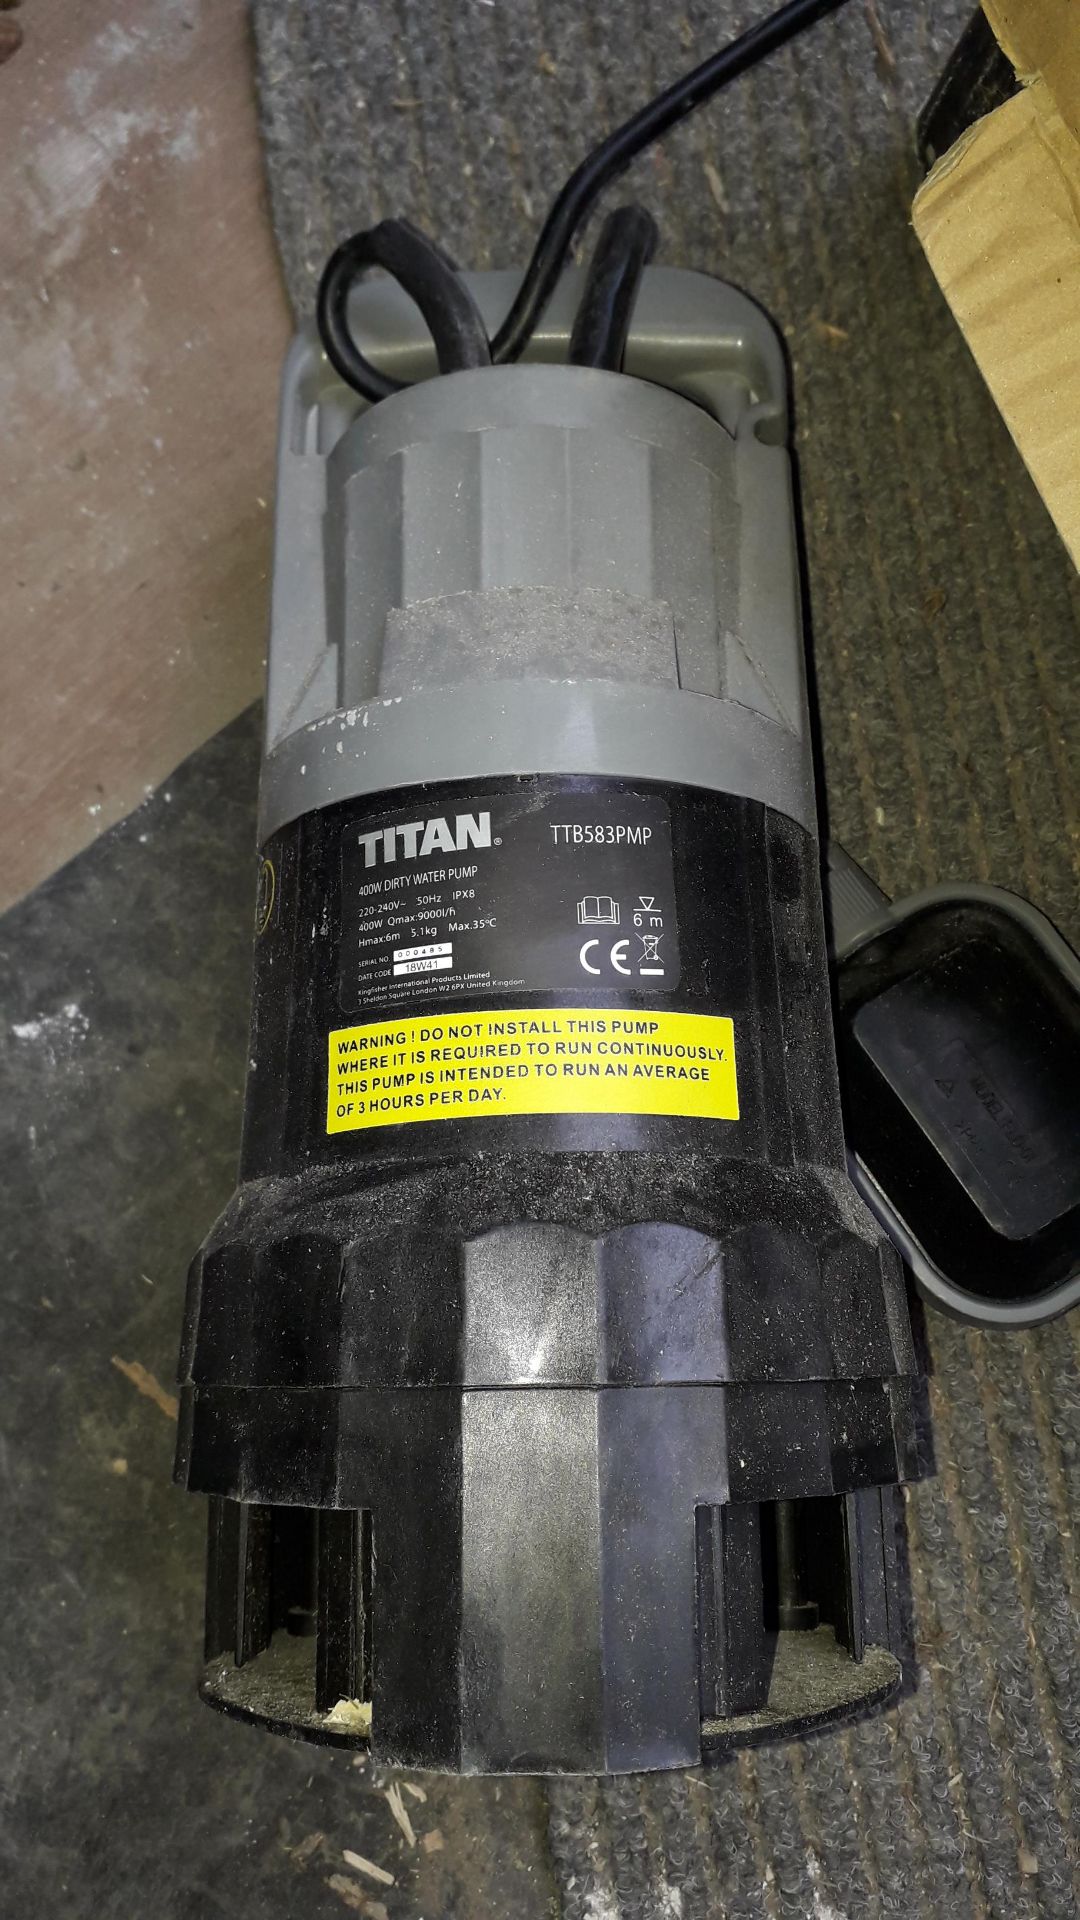 Titan TTB583PMP 400w Submersible Dirty Water Pump, S/N 000485, 240v - Image 2 of 2